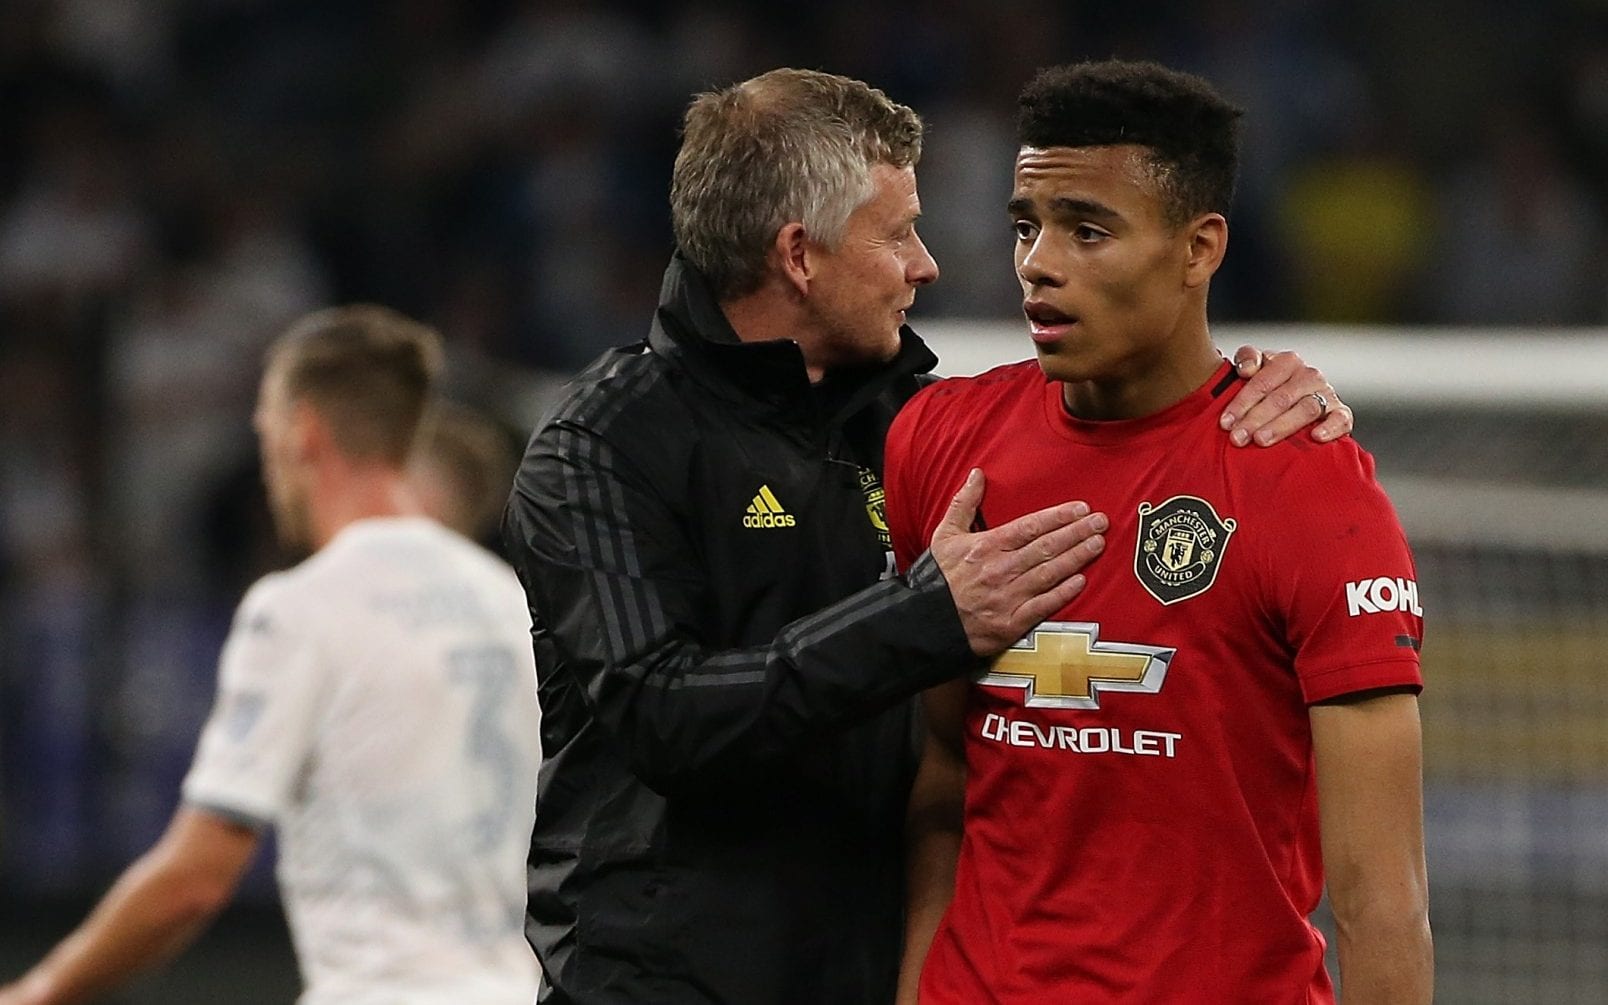 Mason Greenwood is playing with fire